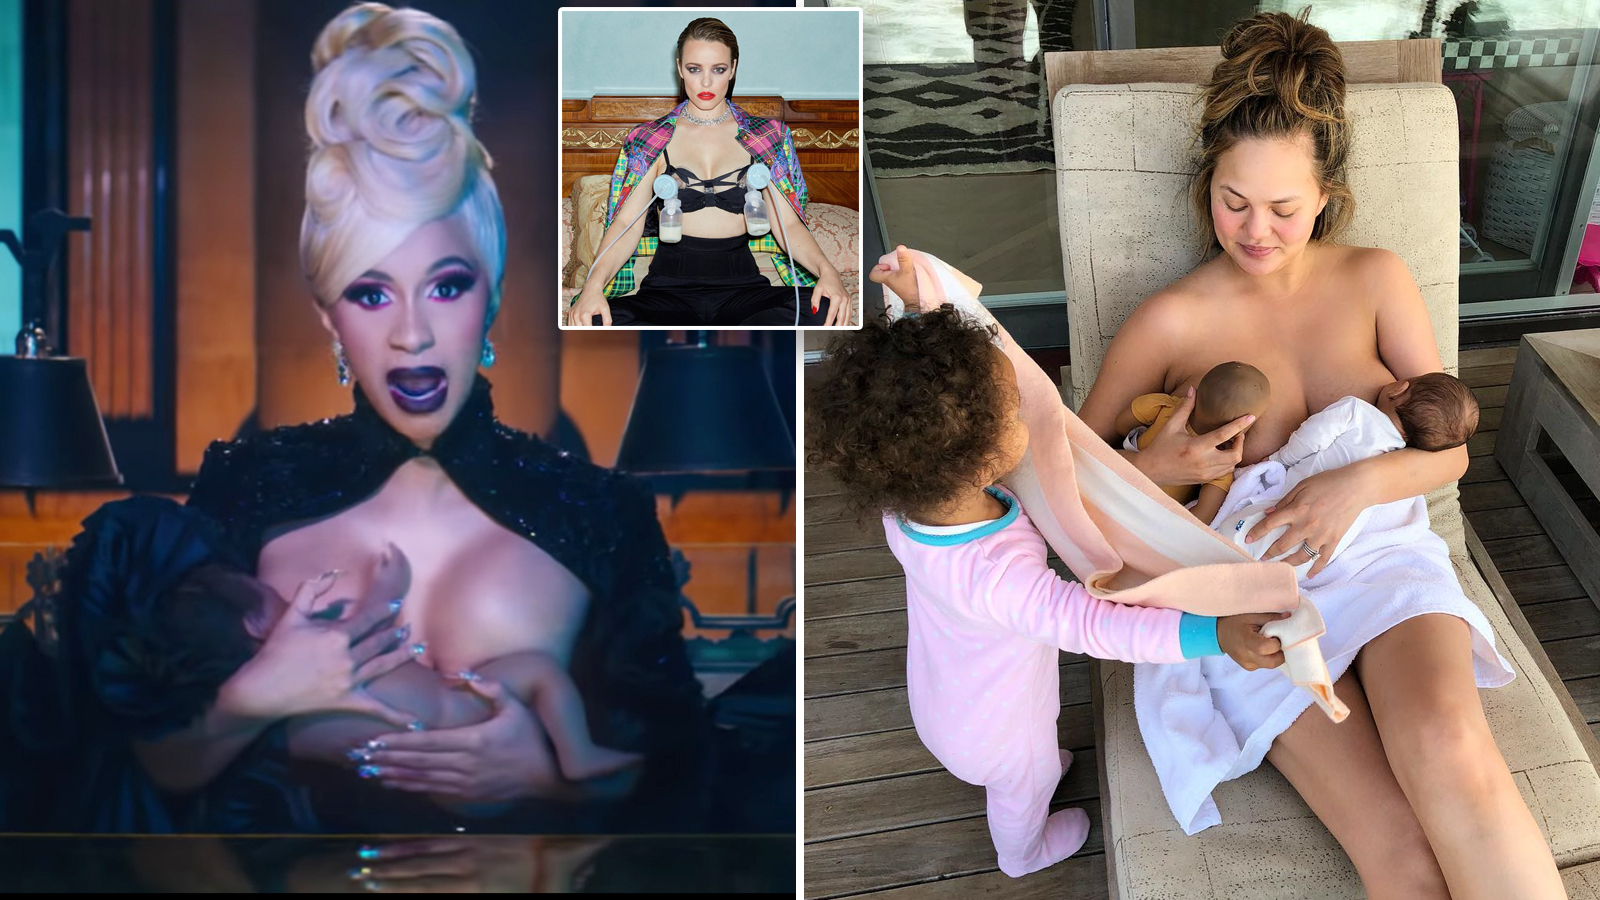 Jenna Natural Big Tits Lactating - Breastfeeding Celebrities: Famous Moms Get Real on Instagram